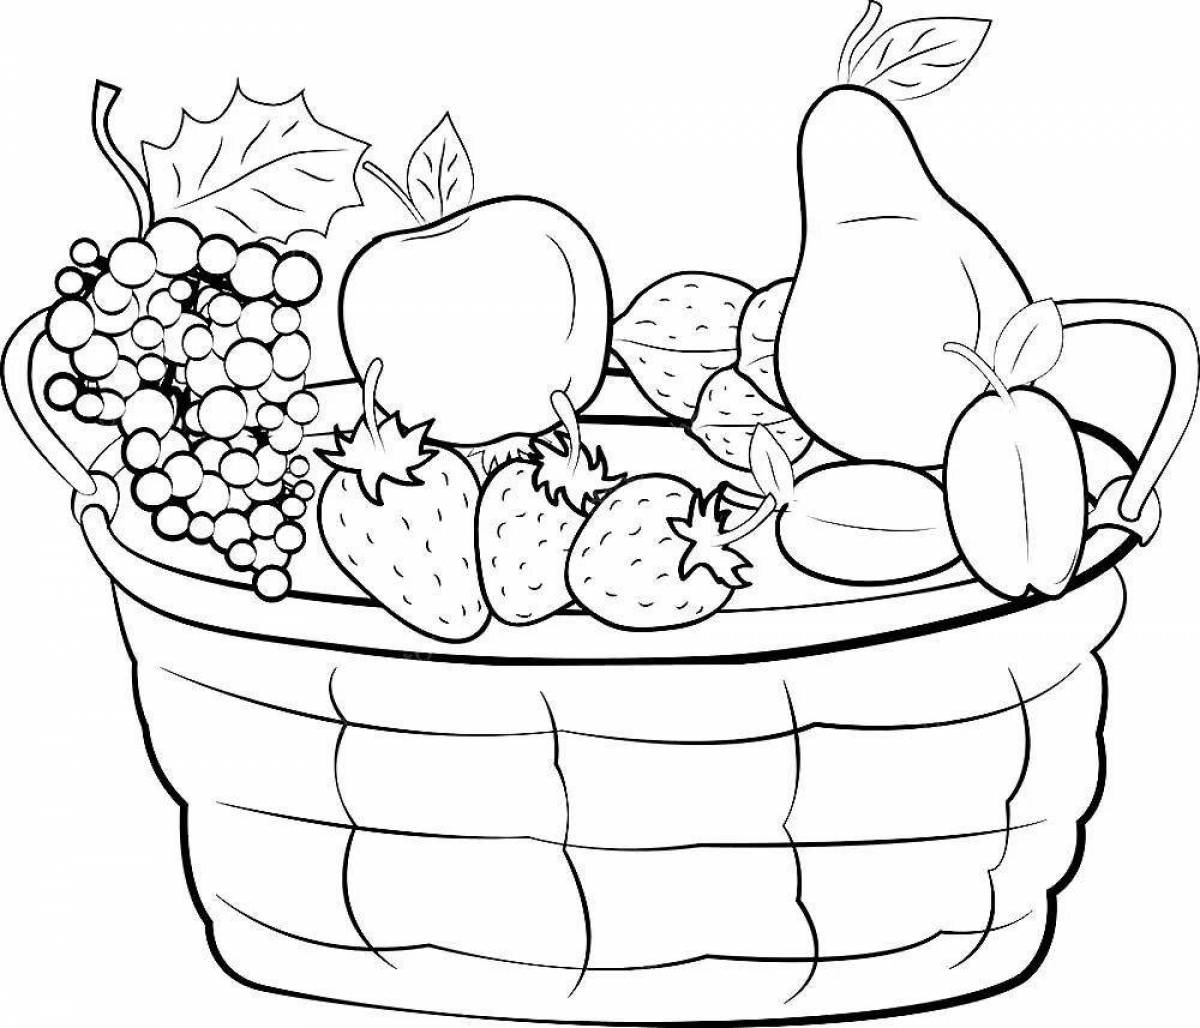 Bright basket of fruits and vegetables